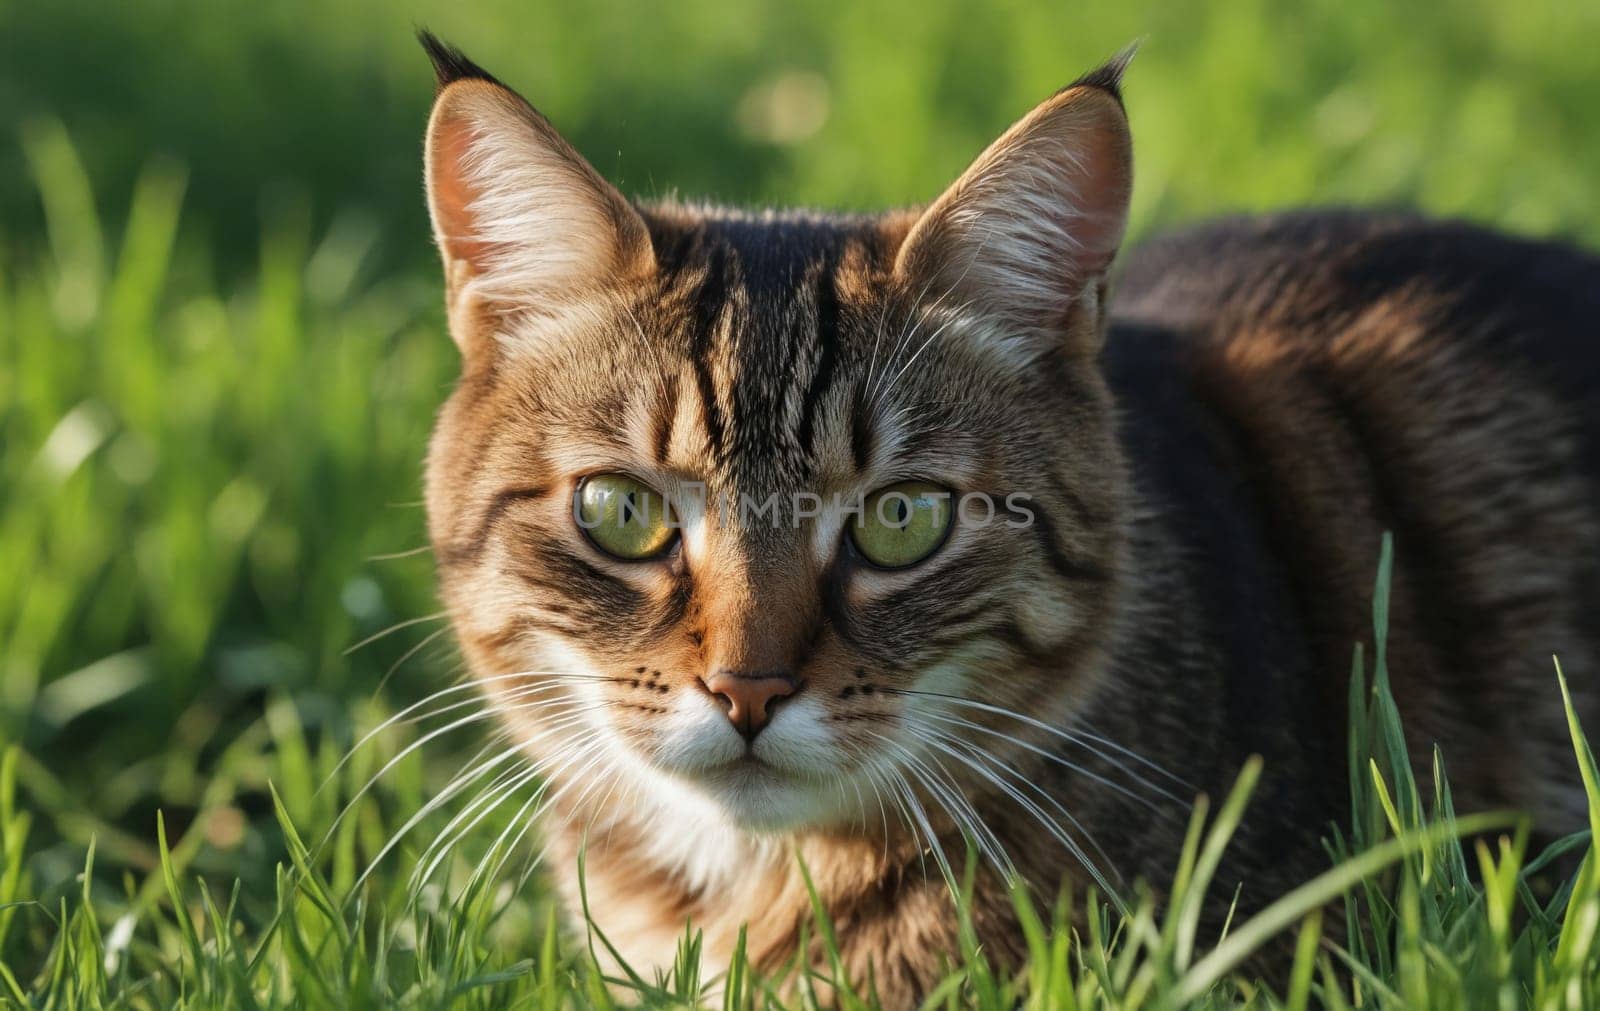 A small to mediumsized Felidae cat, a carnivorous terrestrial animal, is lounging in the grass, gazing at the camera with its fawncolored fur and whiskers, against a natural landscape backdrop